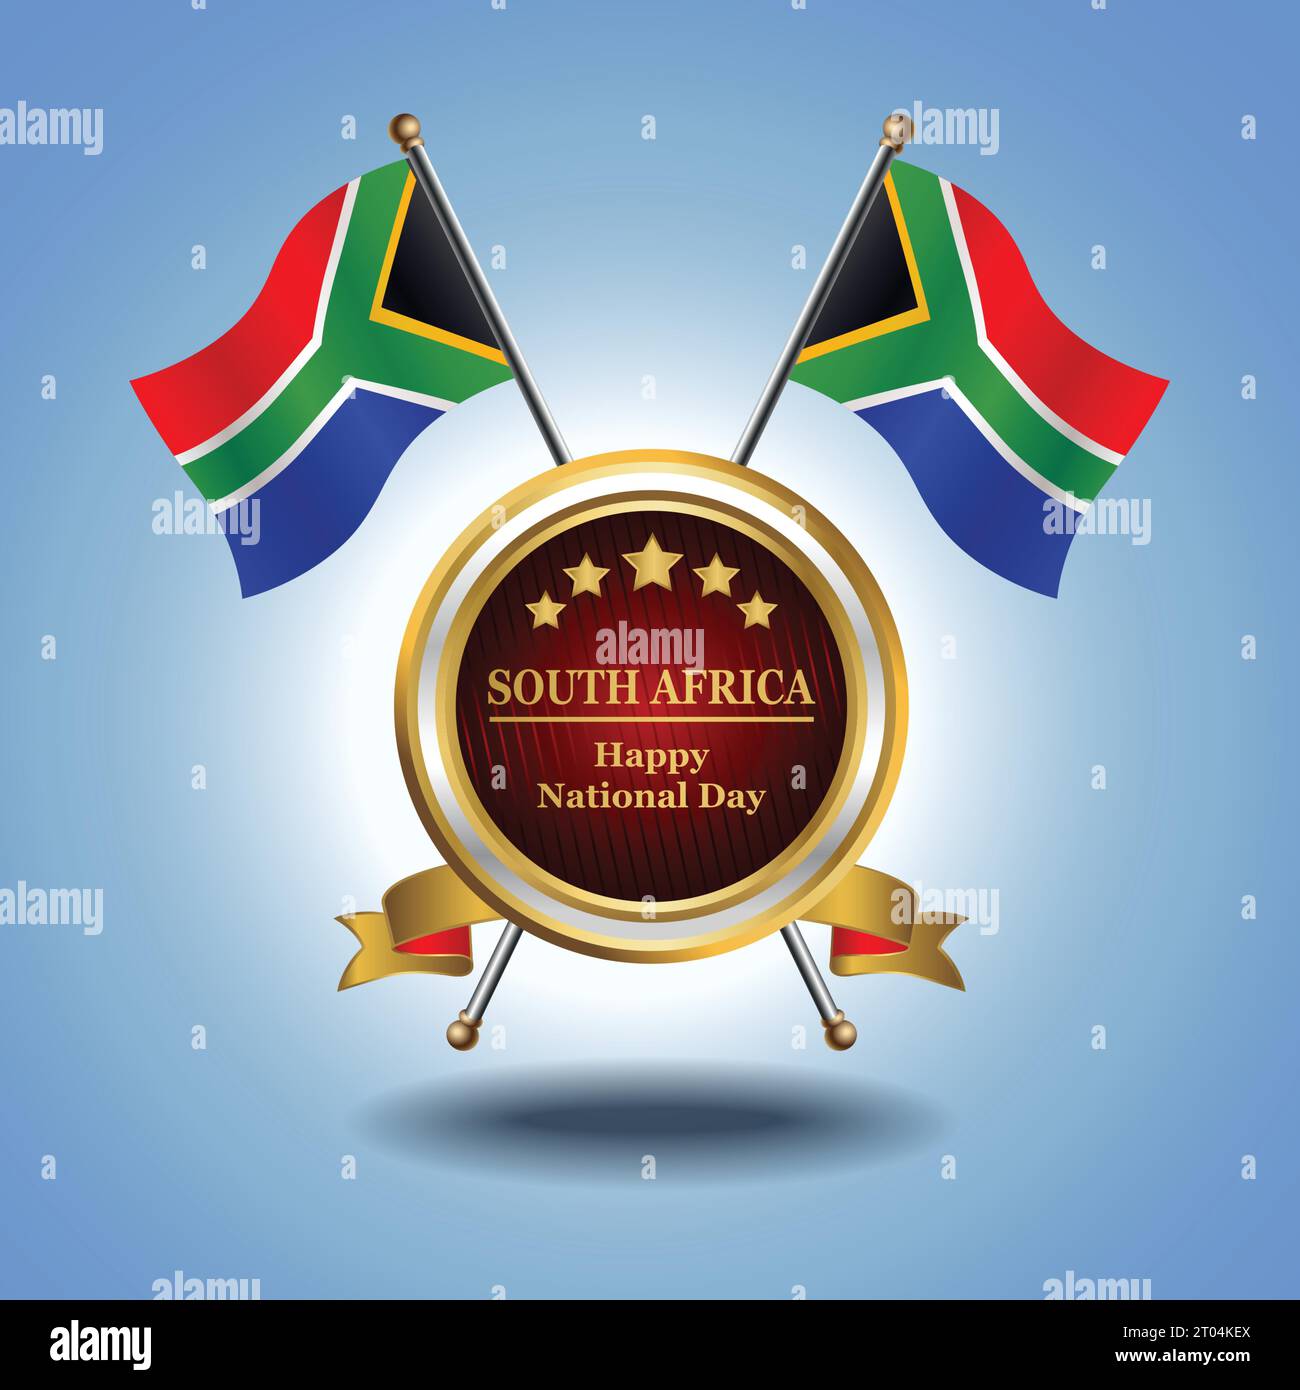 Small National flag of  South Africa on Circle With garadasi blue background Stock Vector